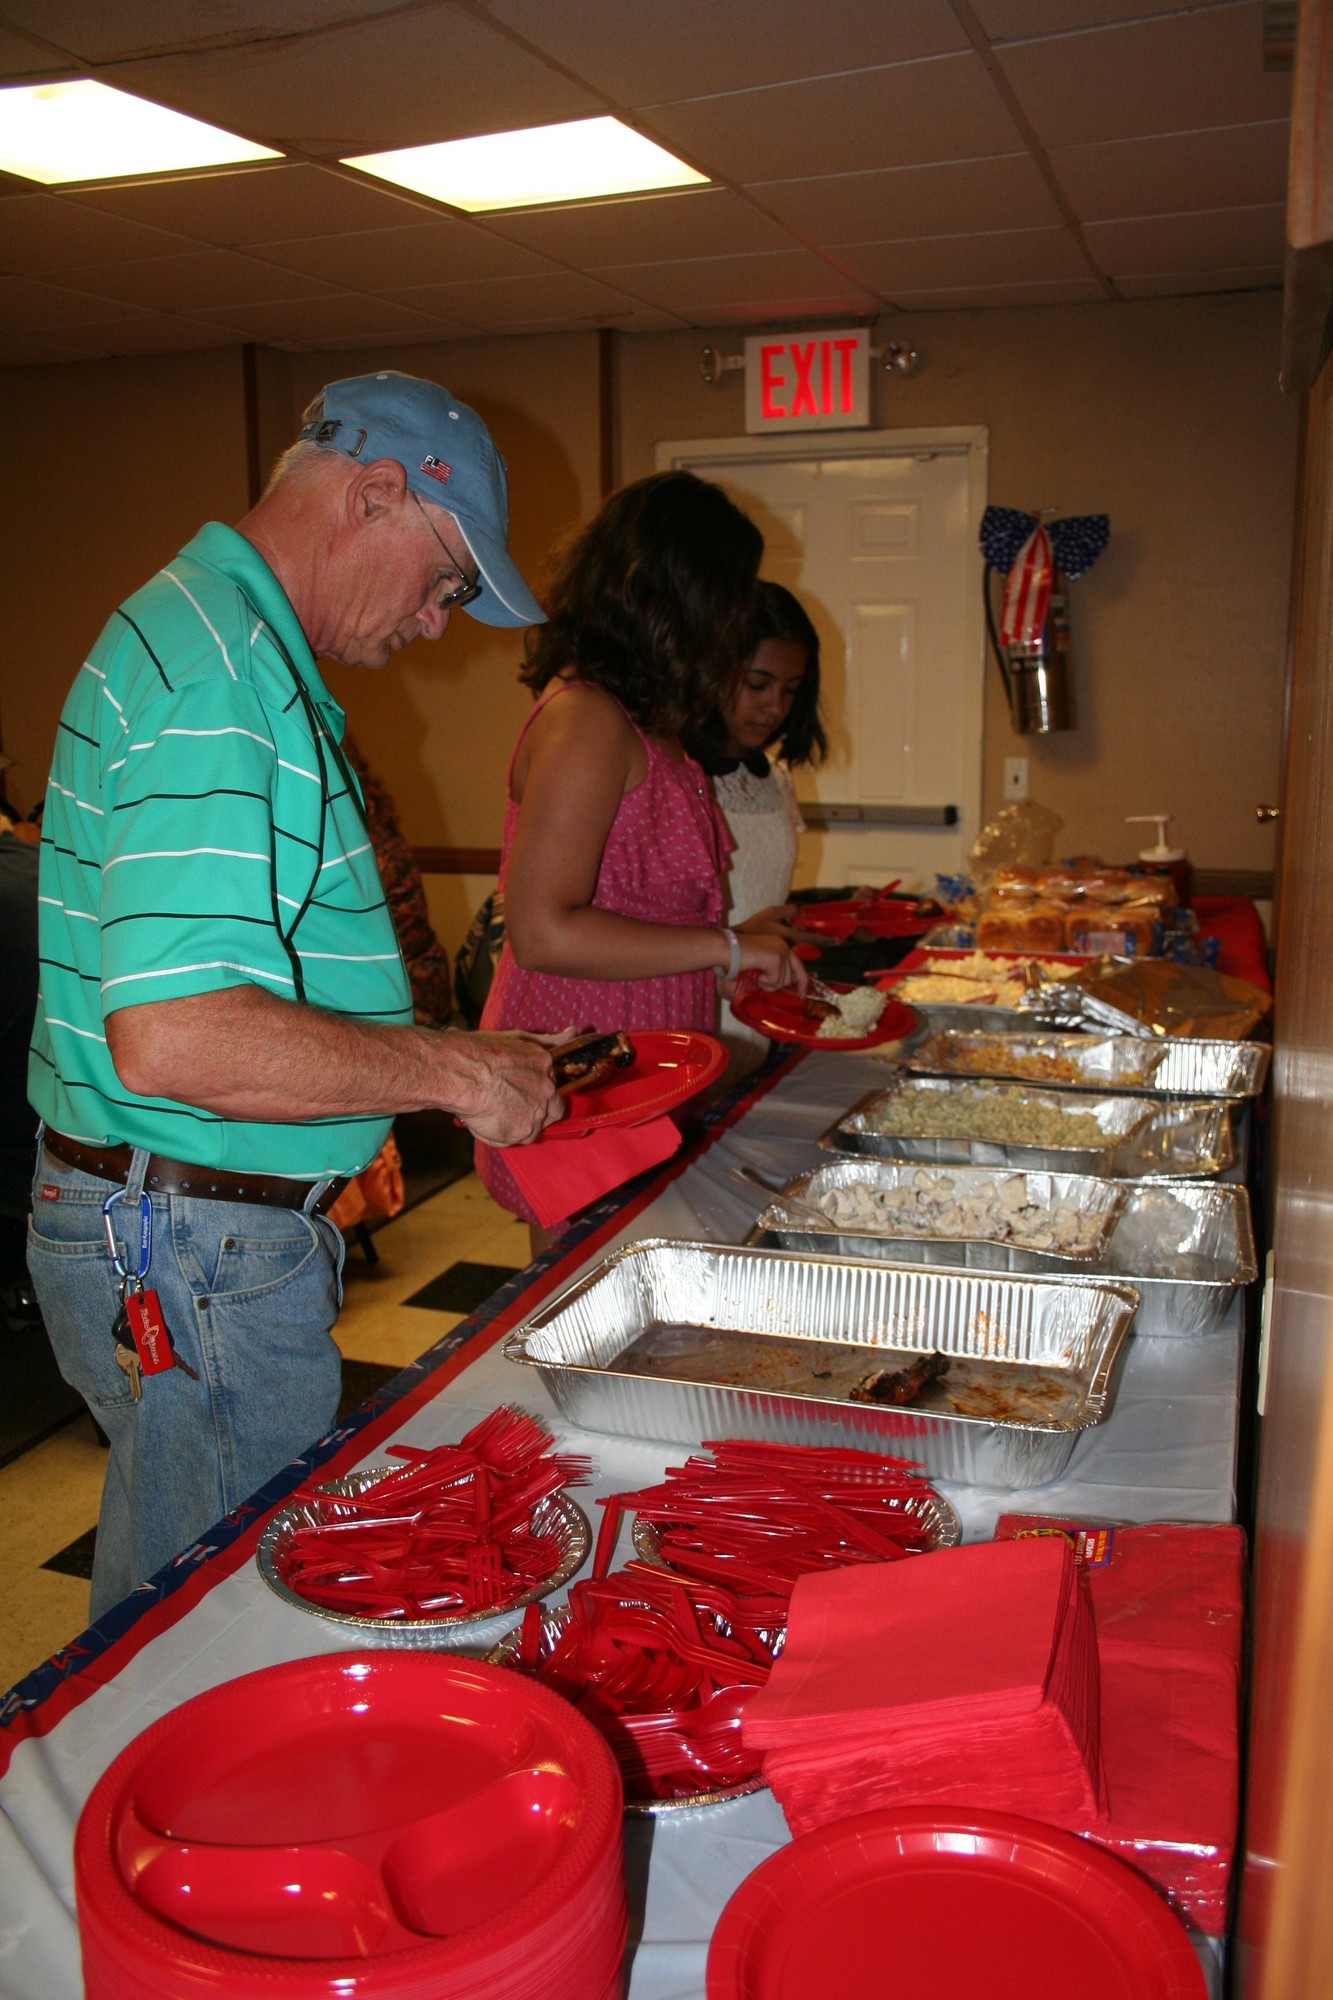 Many People enjoyed the variety of barbecue food during the ‘Red Solo Cup’ party at Baldwin American Legion Post 246 on June 27. The event benefited the Wounded Warriors Project.